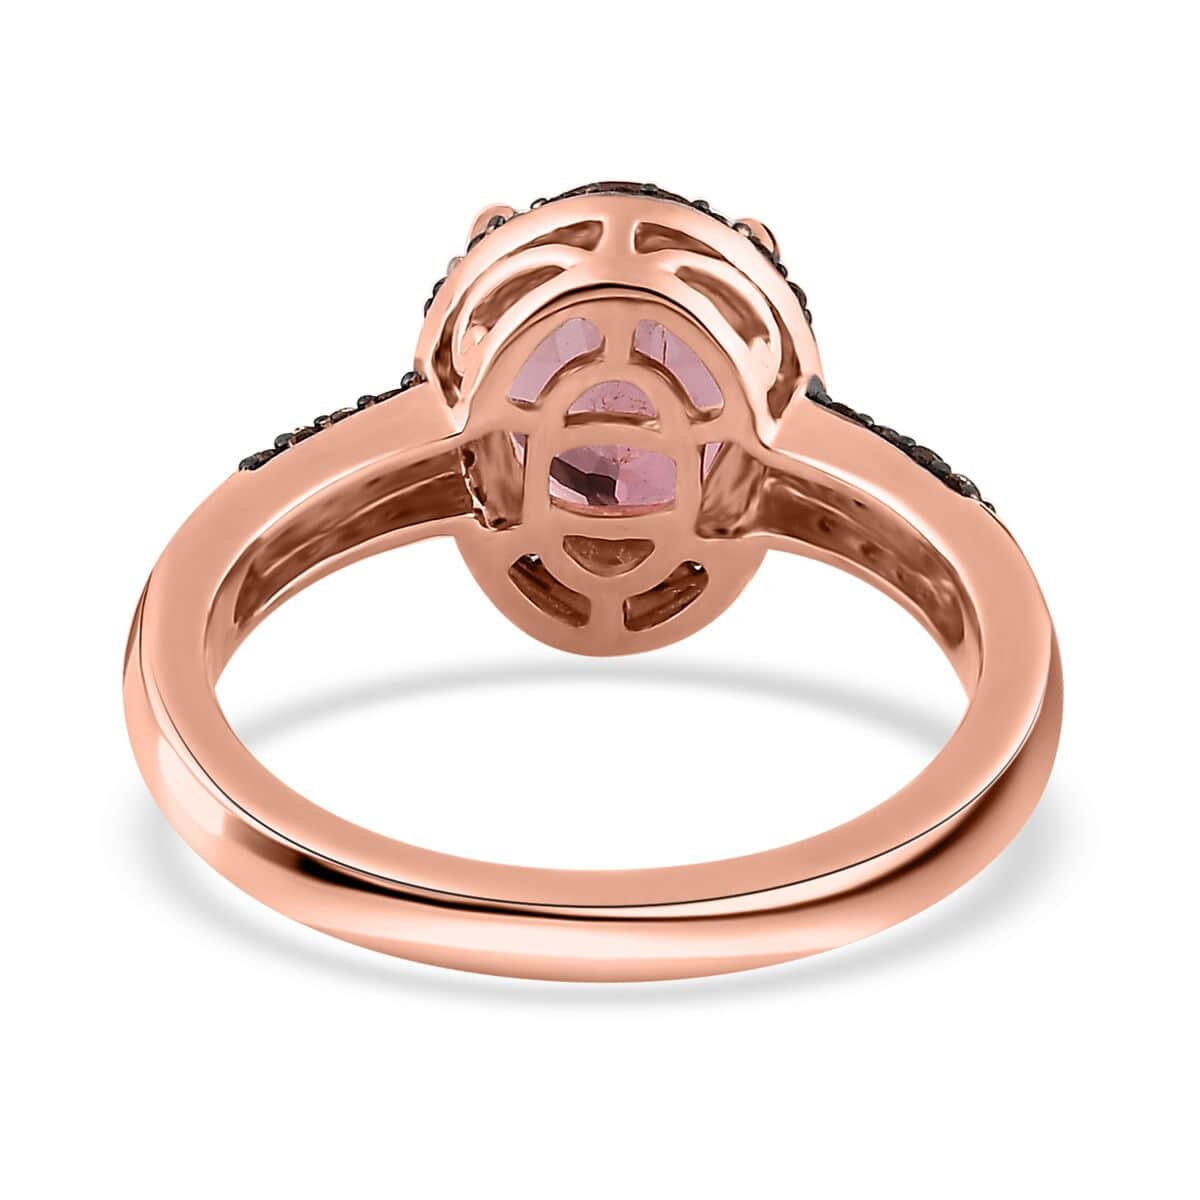 Doorbuster Luxoro 14K Rose Gold Premium Blush Tourmaline and Natural Champagne Diamond I2 Halo Ring (Size 7.0) 2.00 ctw (Del. in 5-7 Days) image number 4